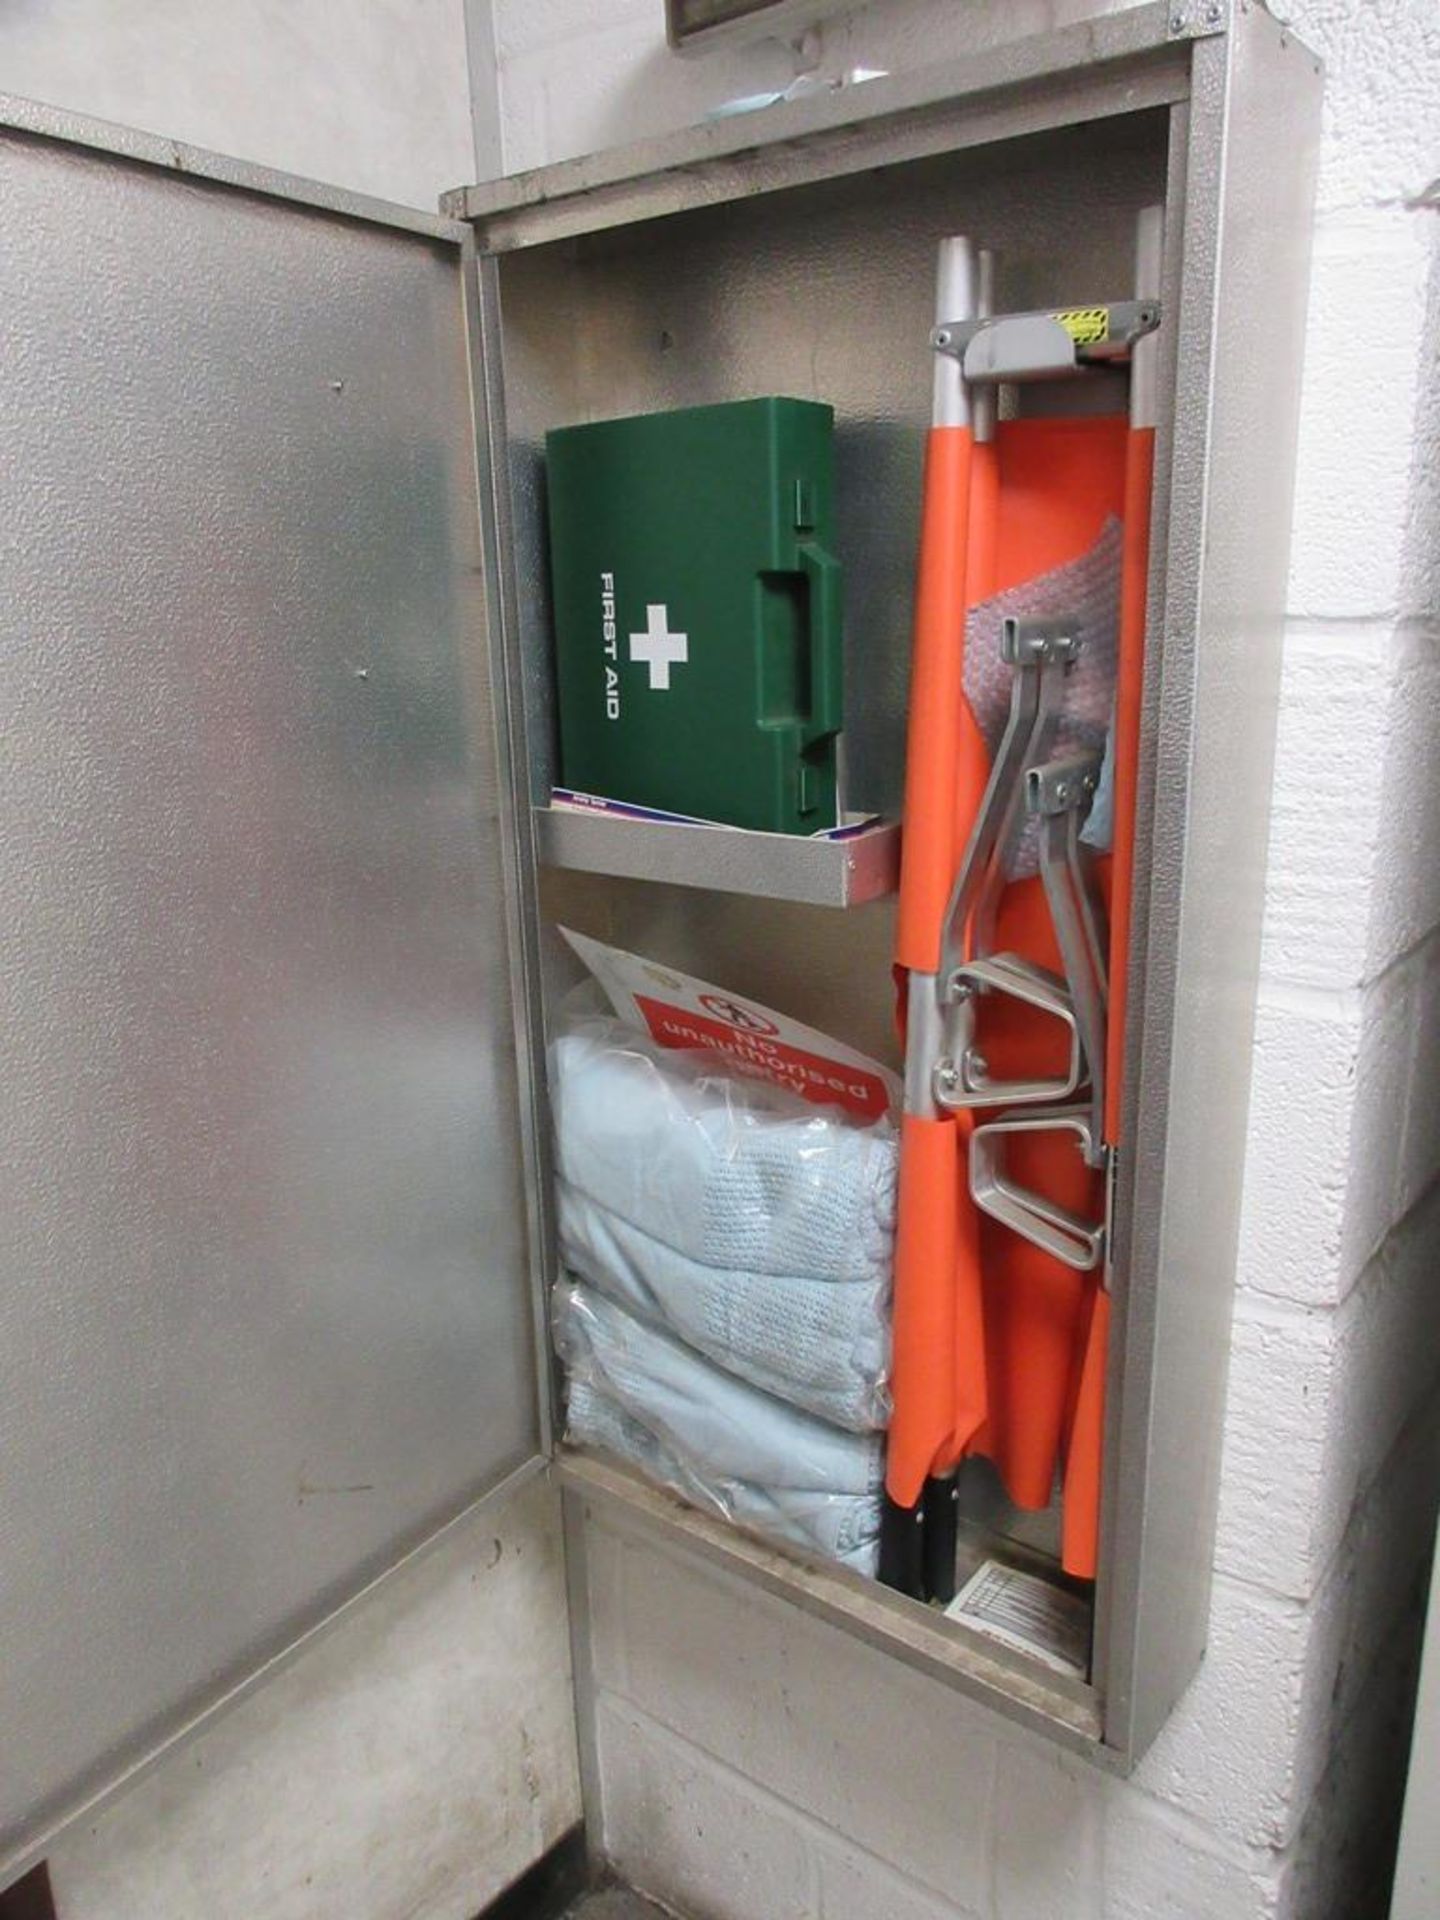 Wall mounted First Aid cabinet with stretcher etc.